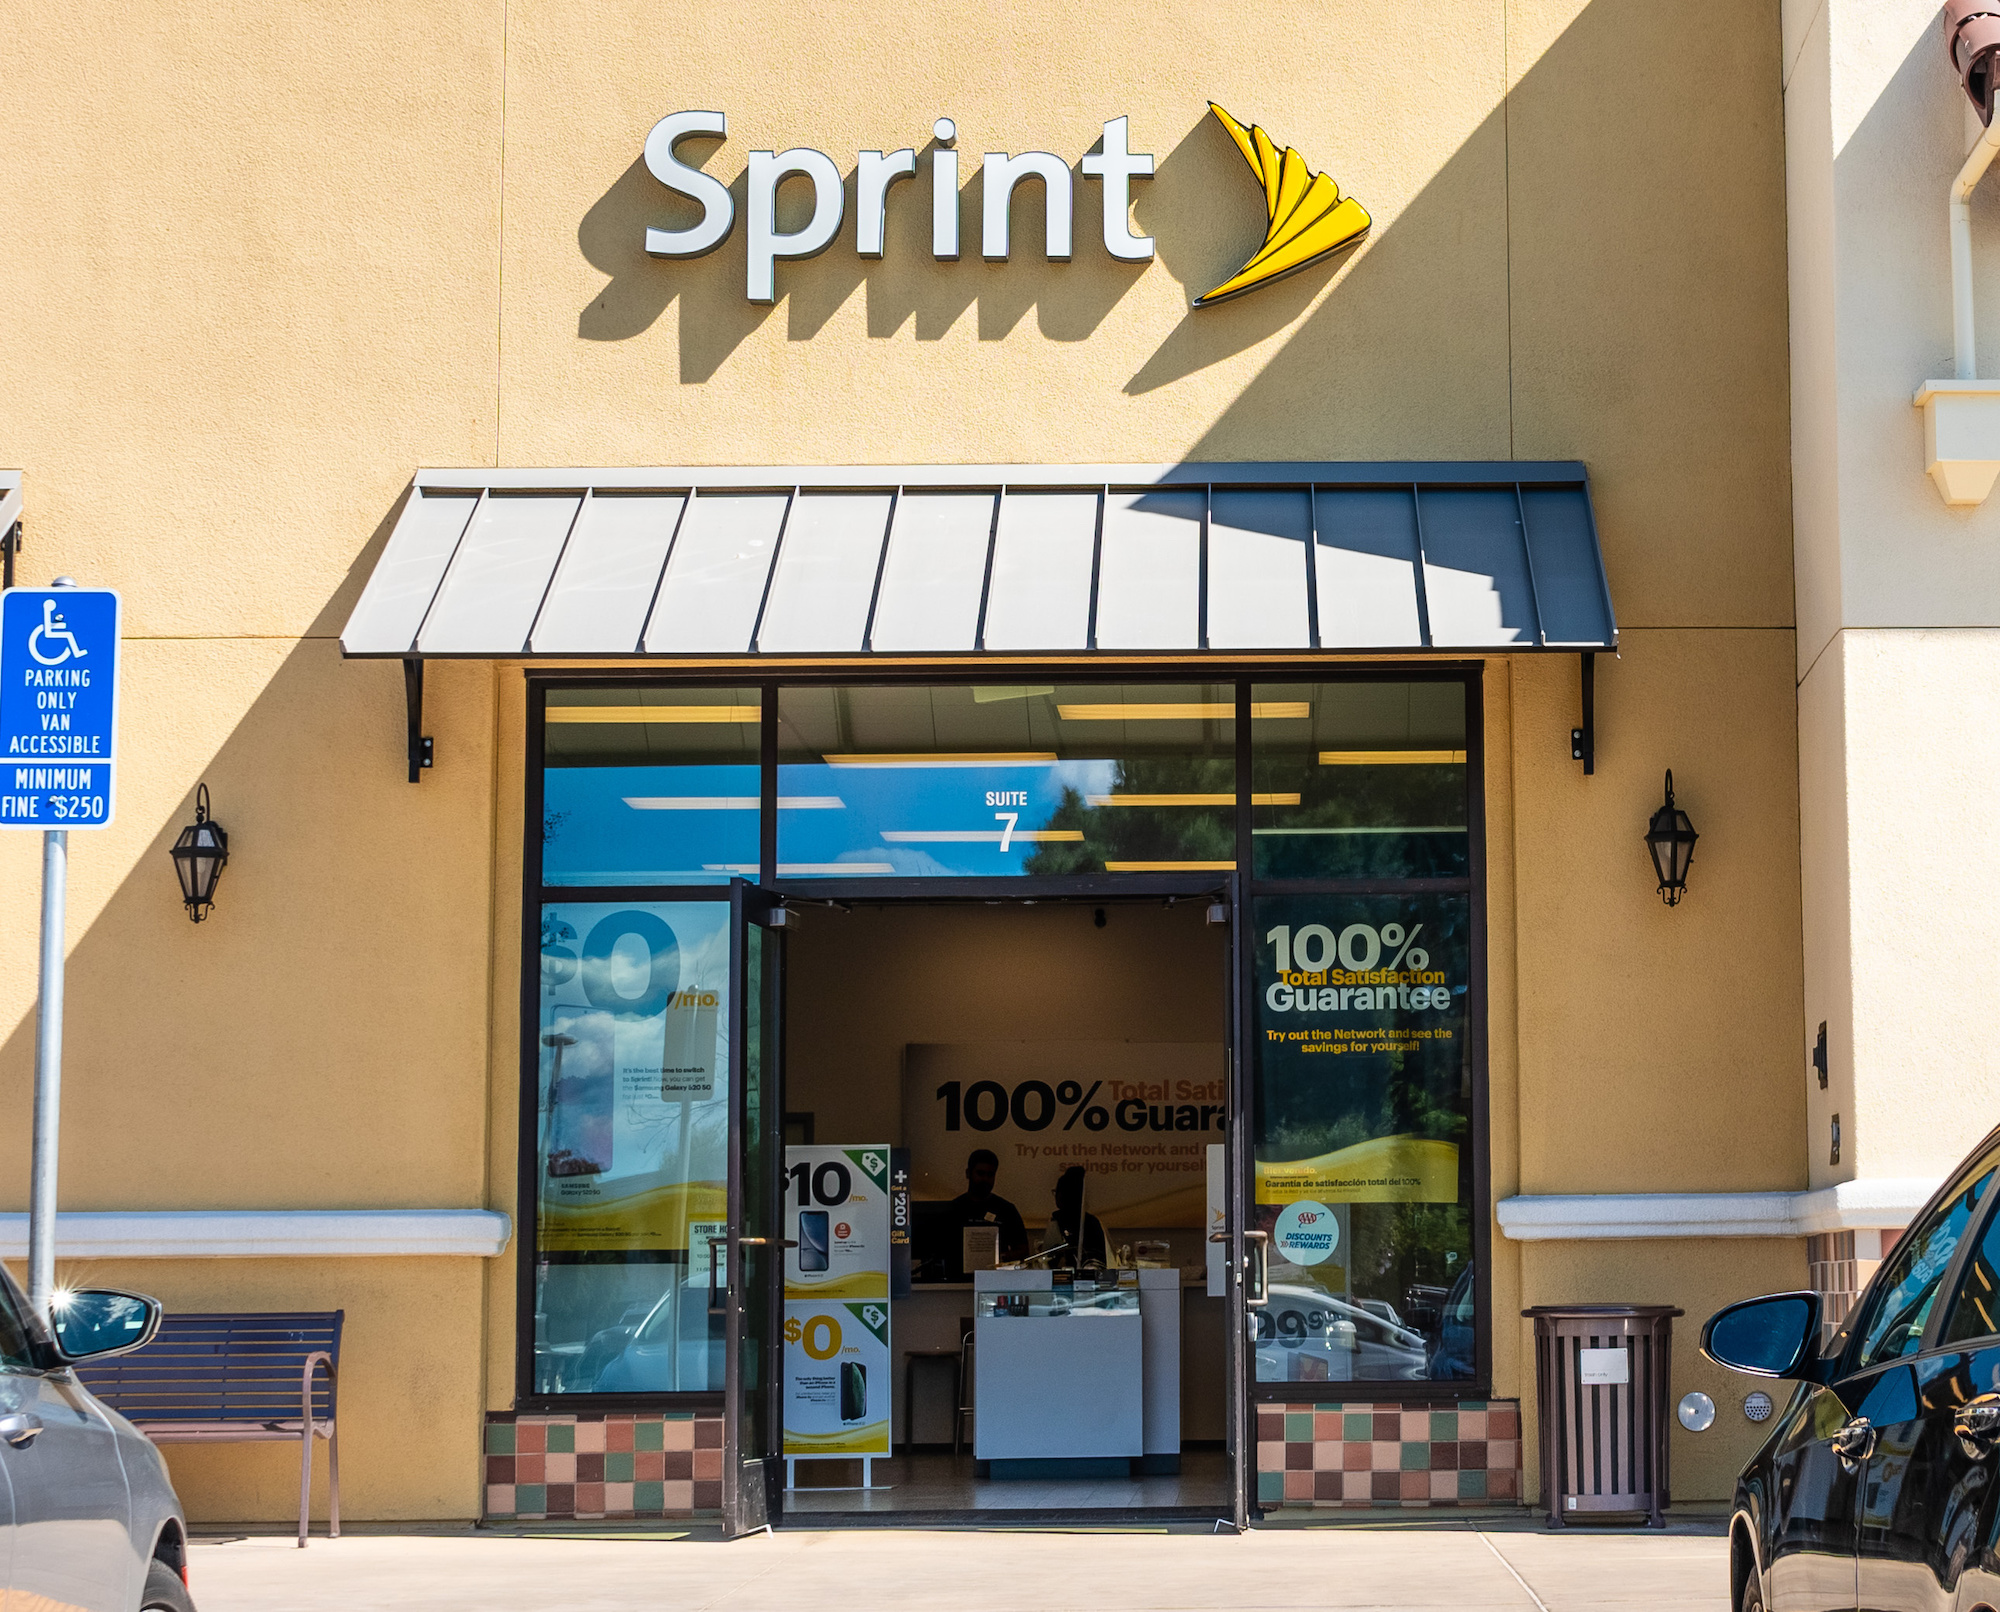 Free phone with sprint installment plan offers